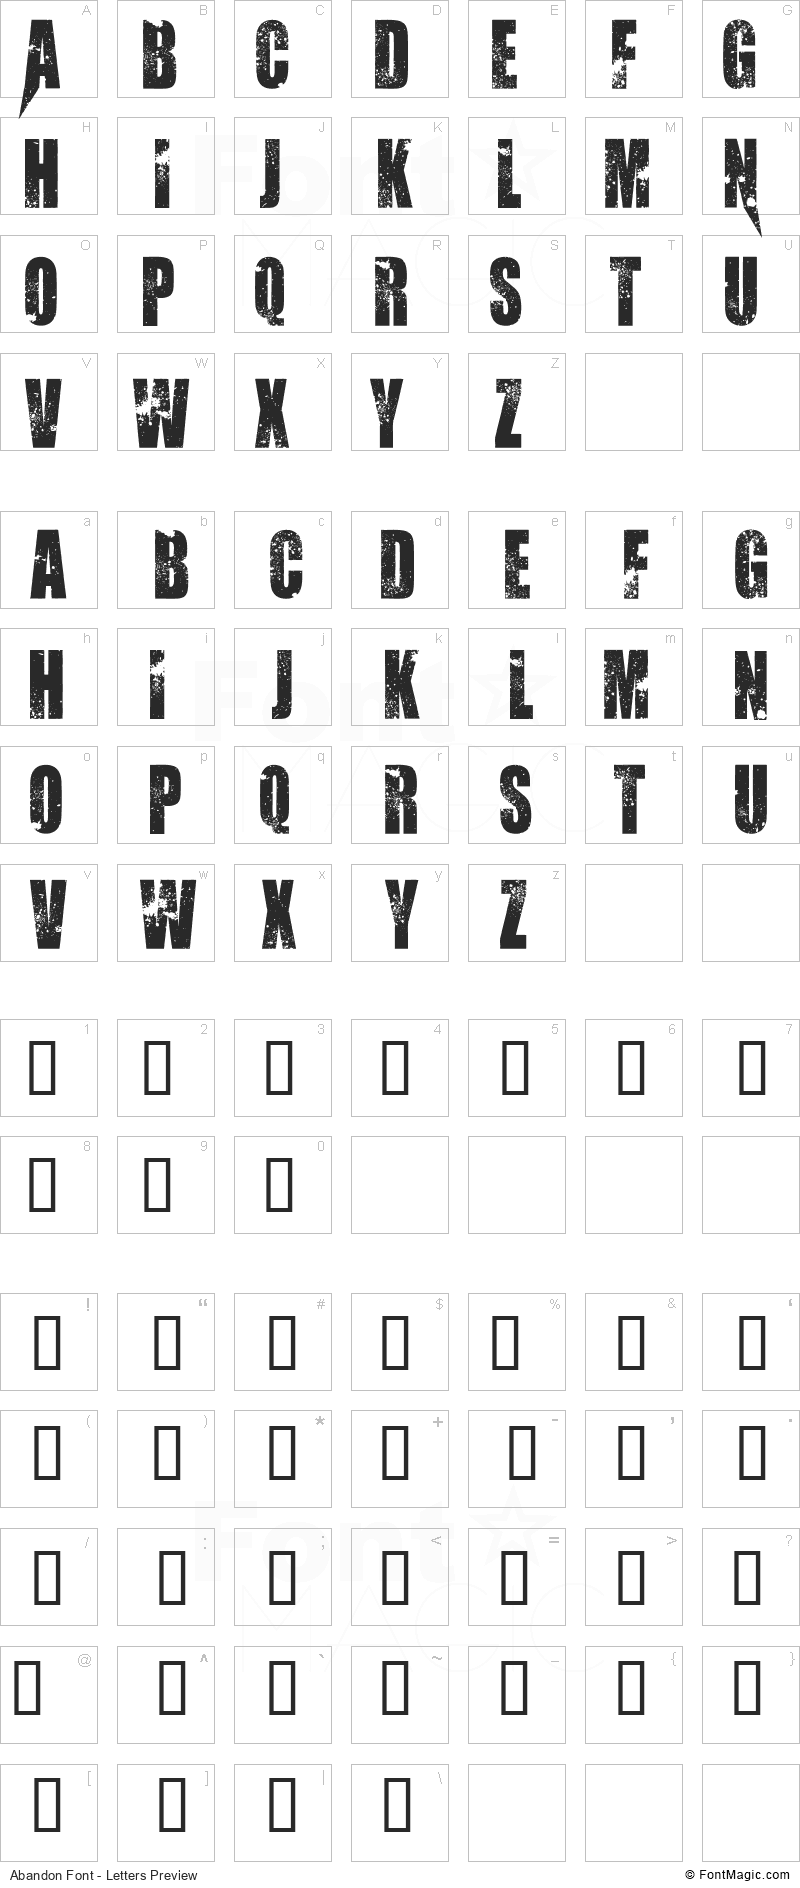 Abandon Font - All Latters Preview Chart